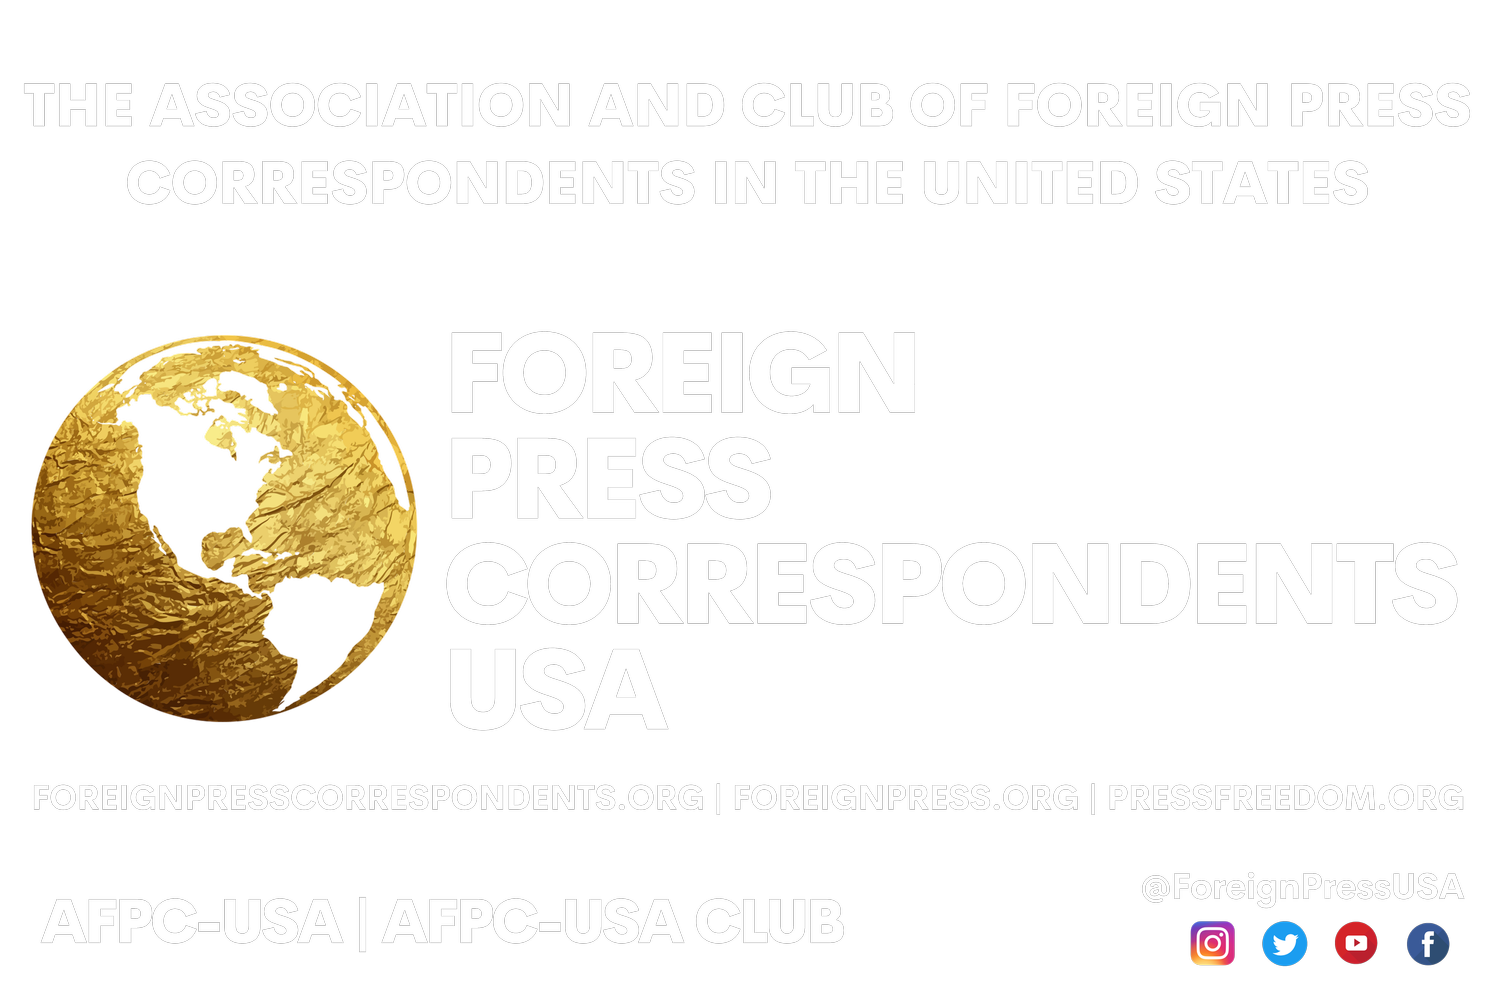 The Association and Club of Foreign Press Correspondents in the United States 